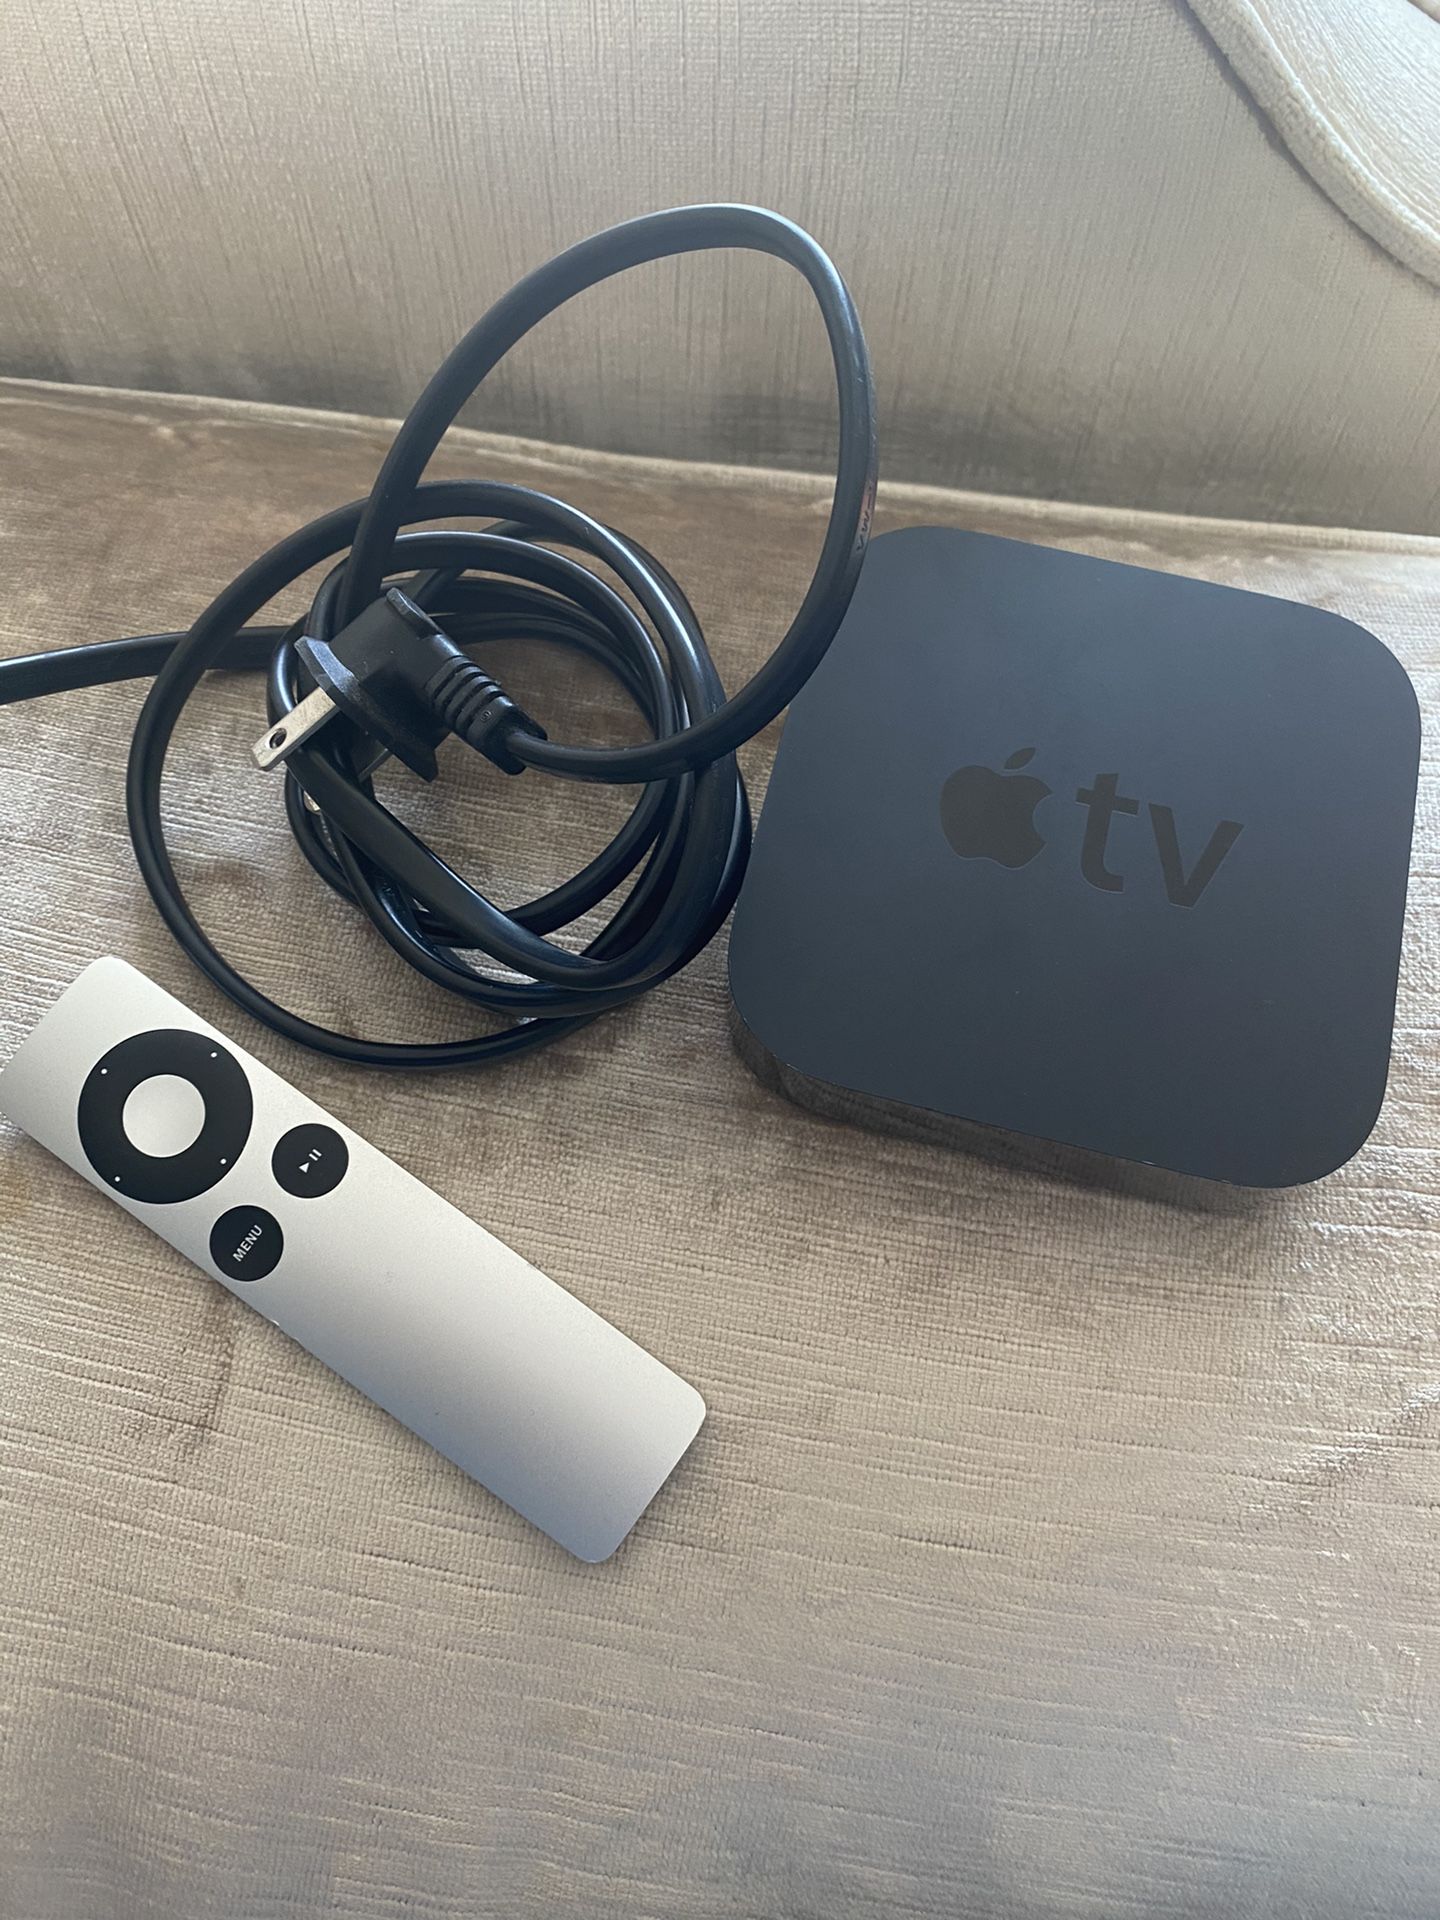 3rd gen Apple TV with Remote